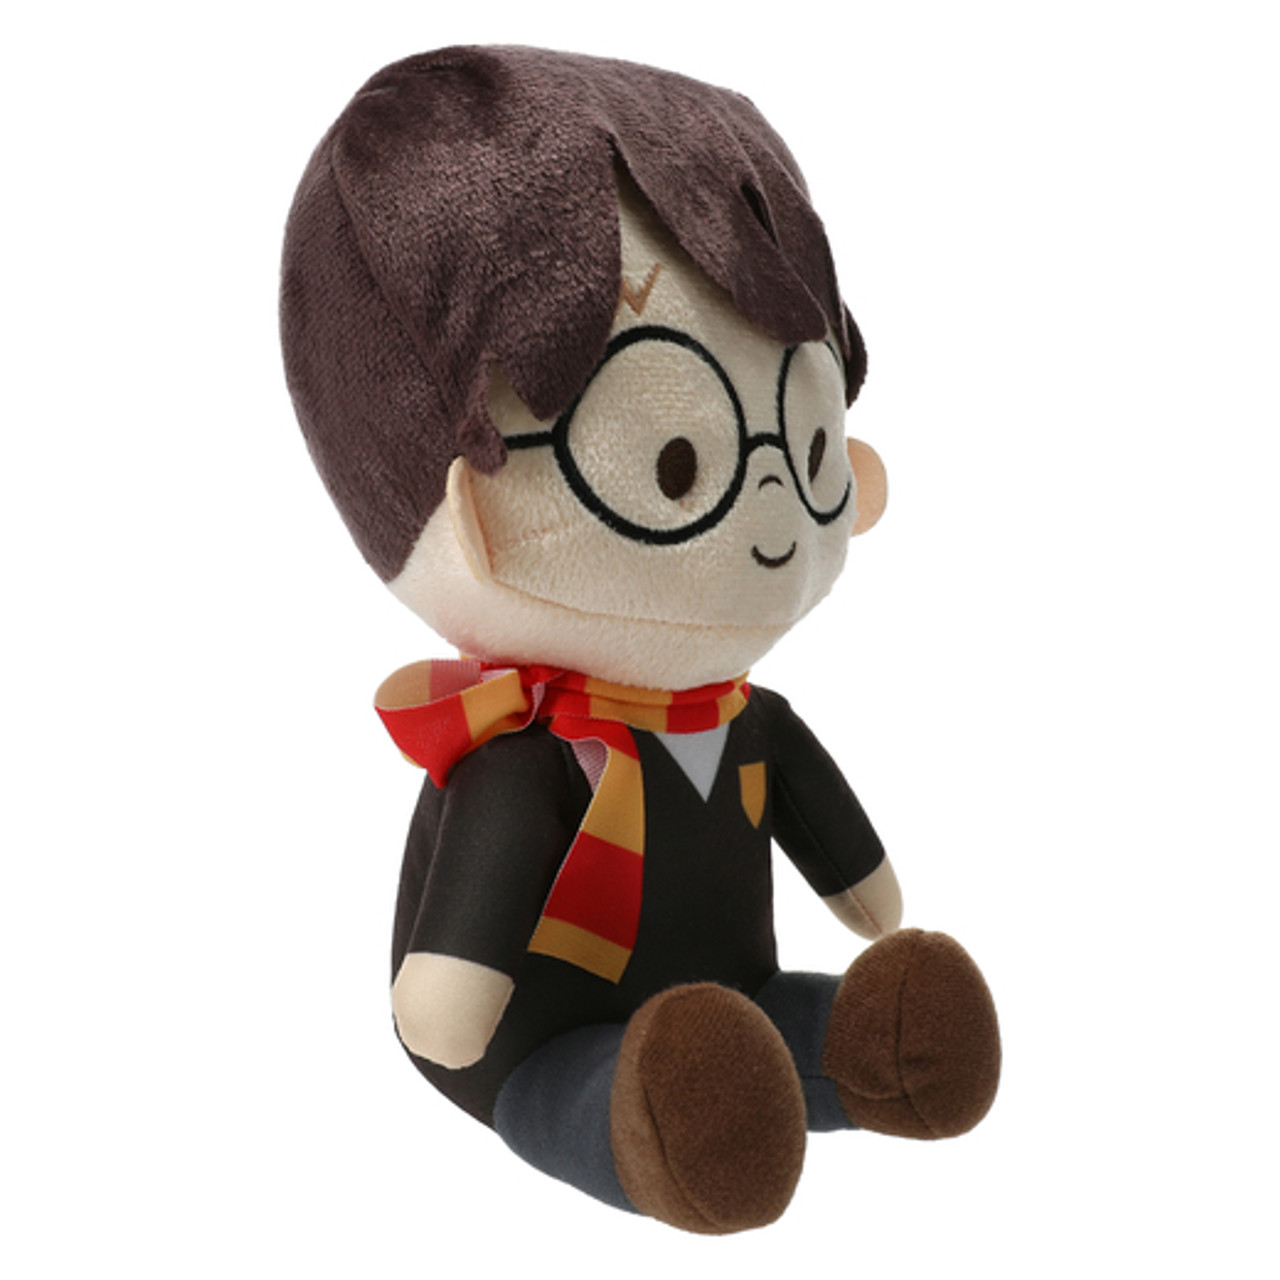 Harry Potter Plush 9 Sitting Character Doll by Just Play - Little Dreamers  Pajamas